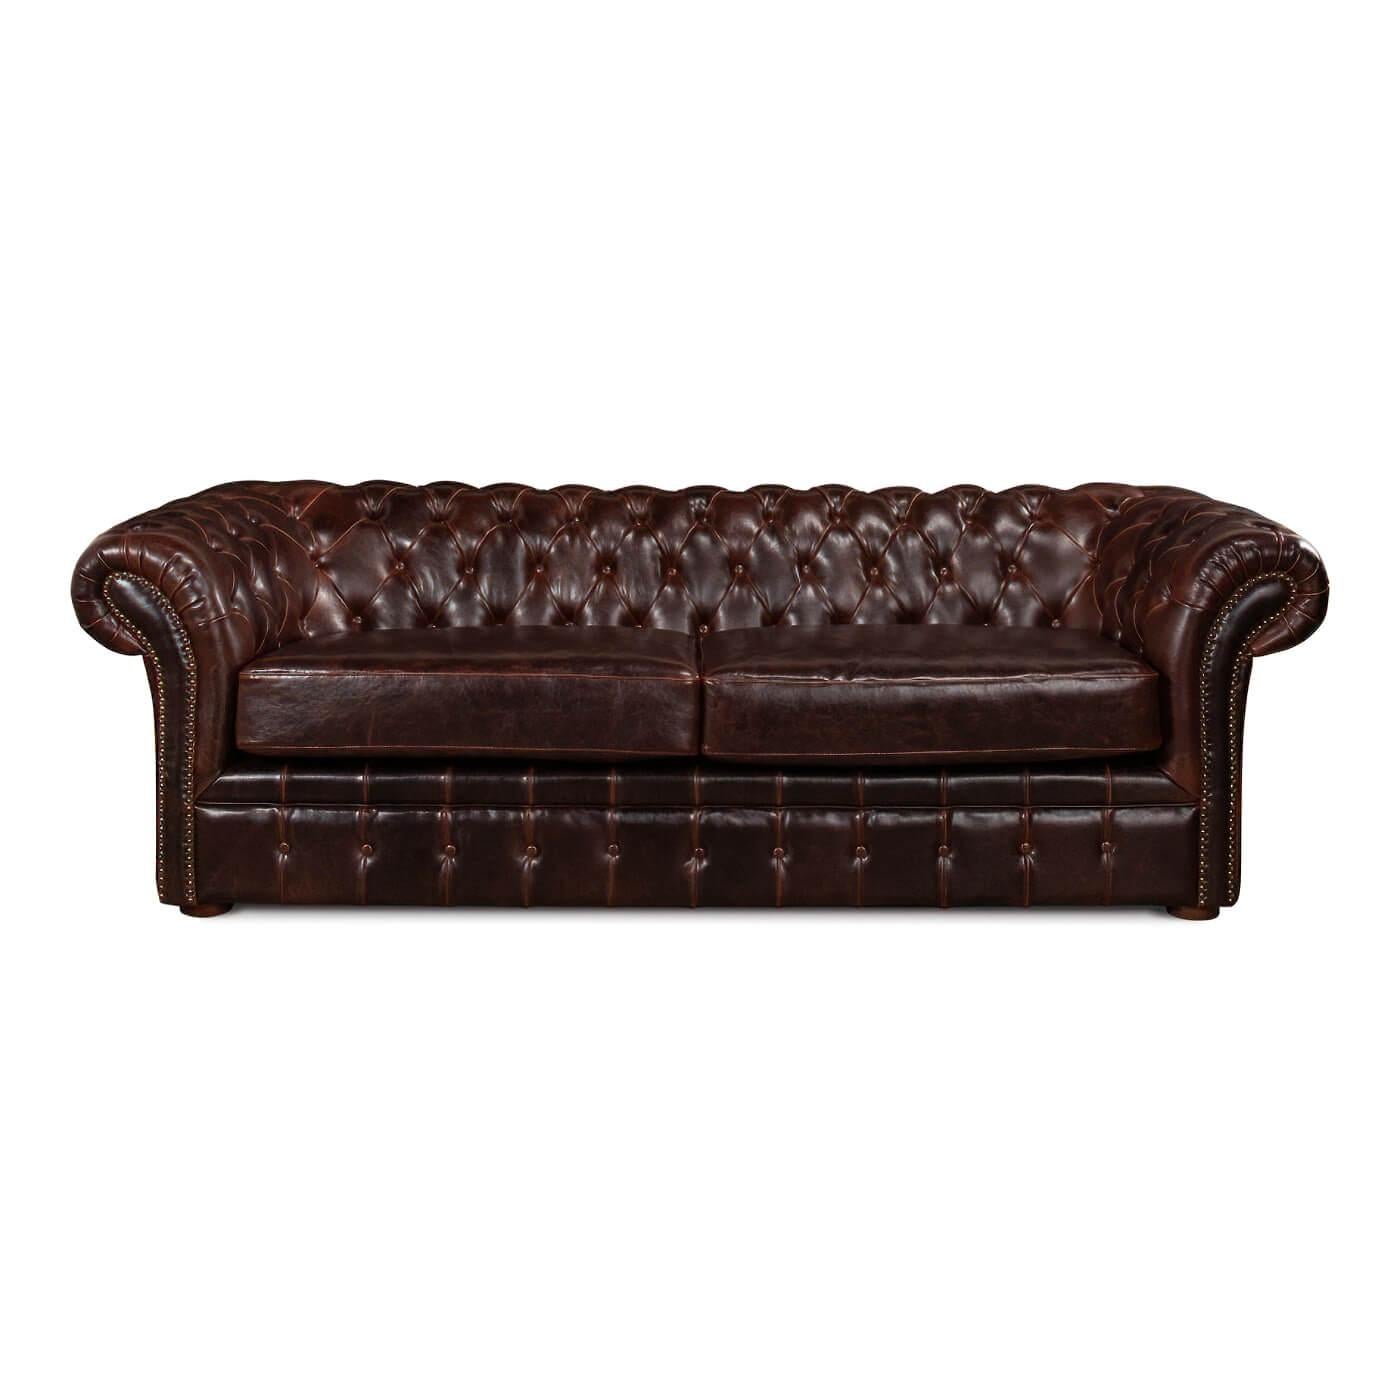 A tufted leather chesterfield sofa upholstered in rich traditional brown leather. A take on the traditional 19th century English design with tufted rolled arms and backrest with split cushion seat.

Dimensions: 91